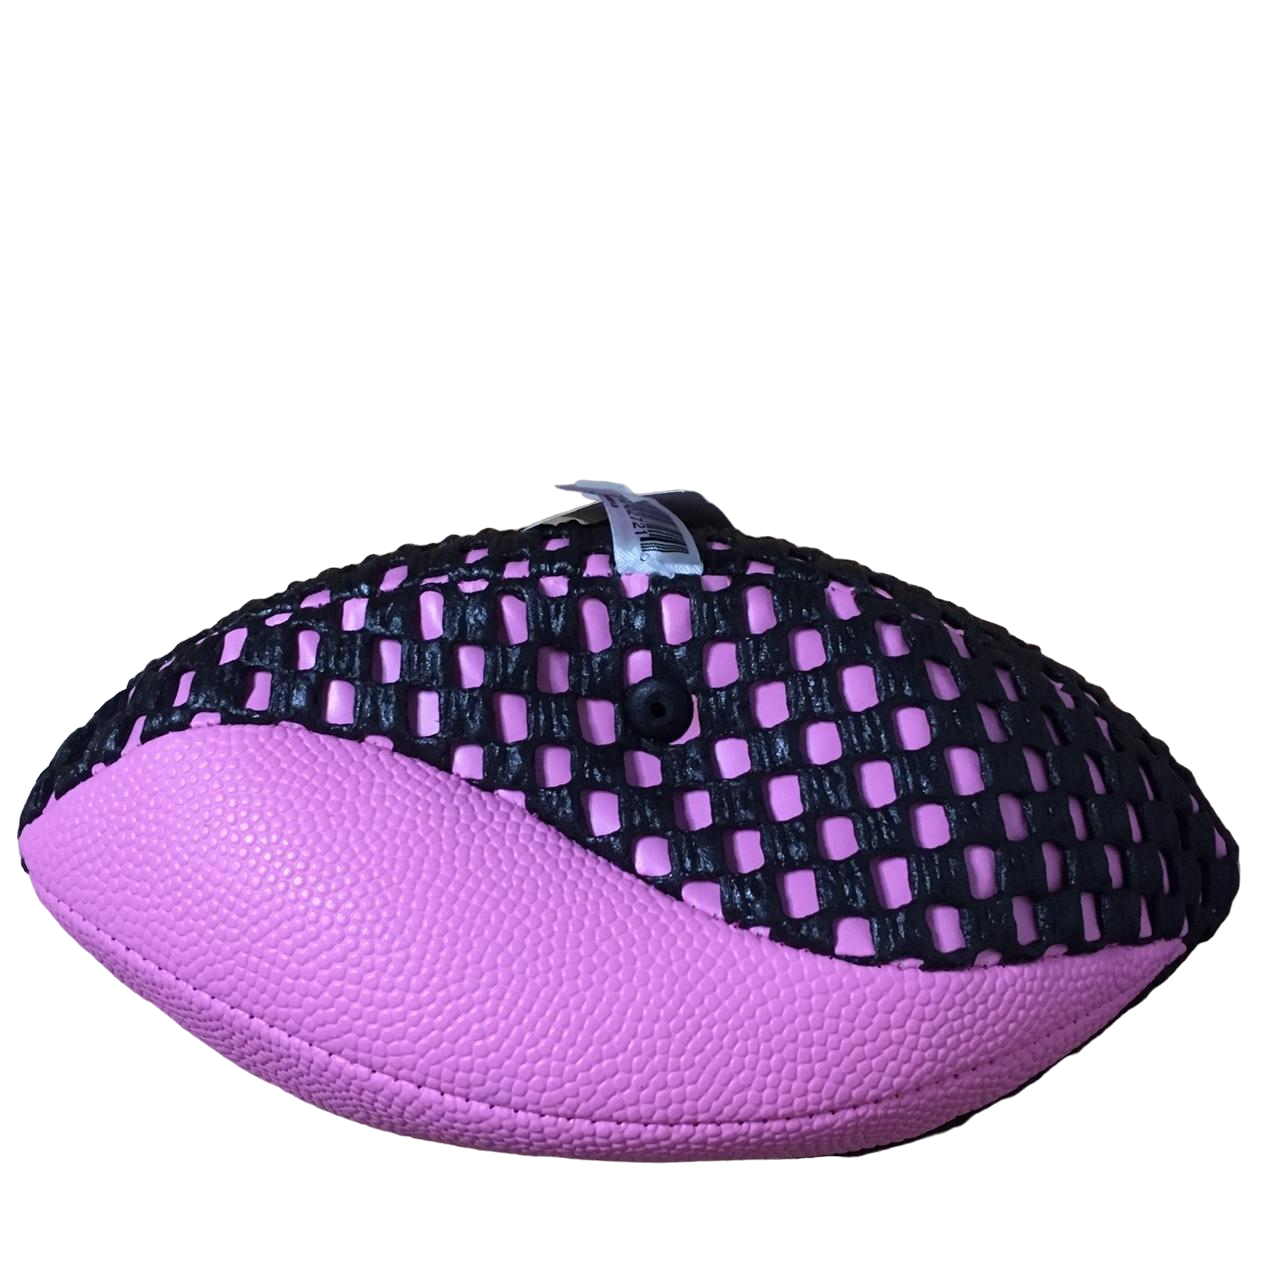 Very rare Hooters 9" Inflatble Pink Football